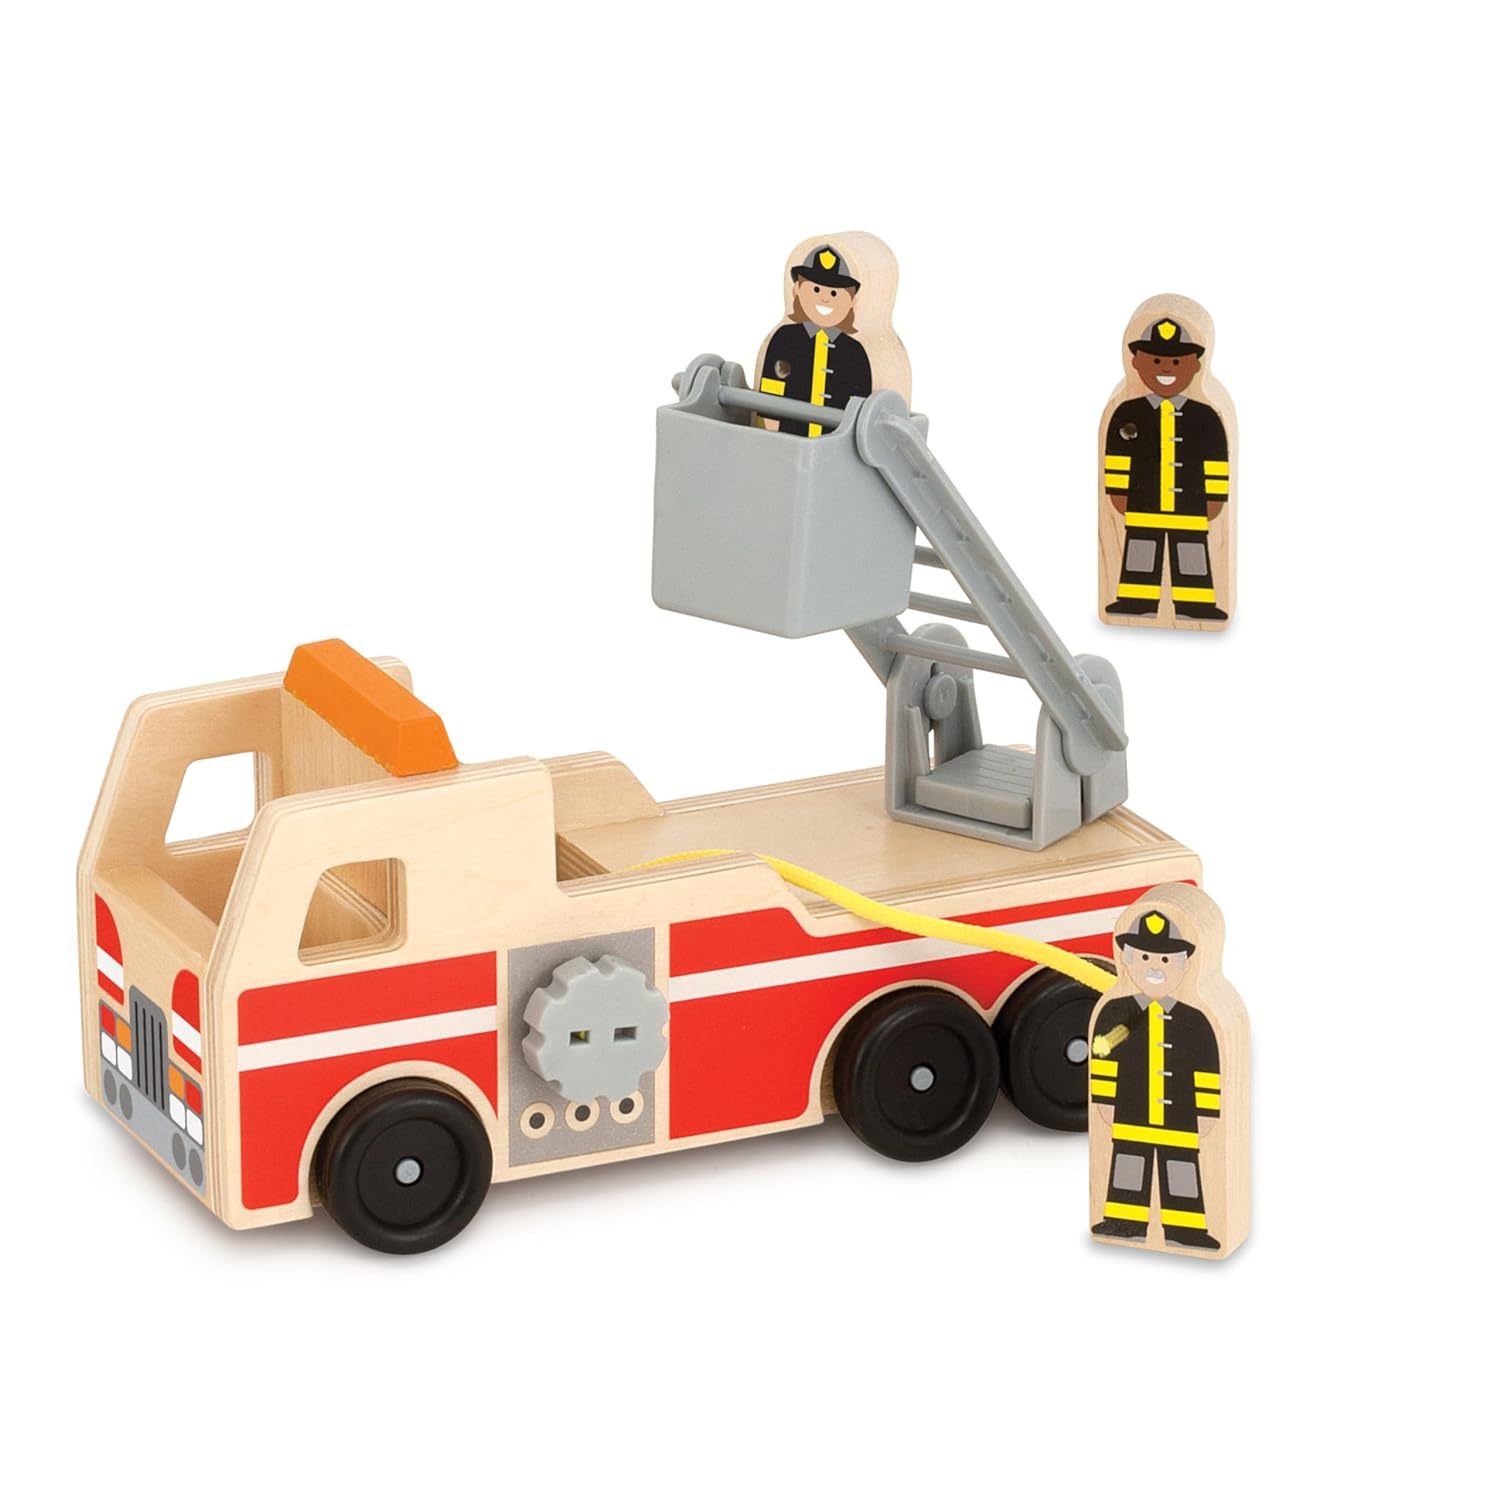 Melissa & Doug Wooden Fire Truck With 3 Firefighter Play Figures - Fire Truck To - $38.99